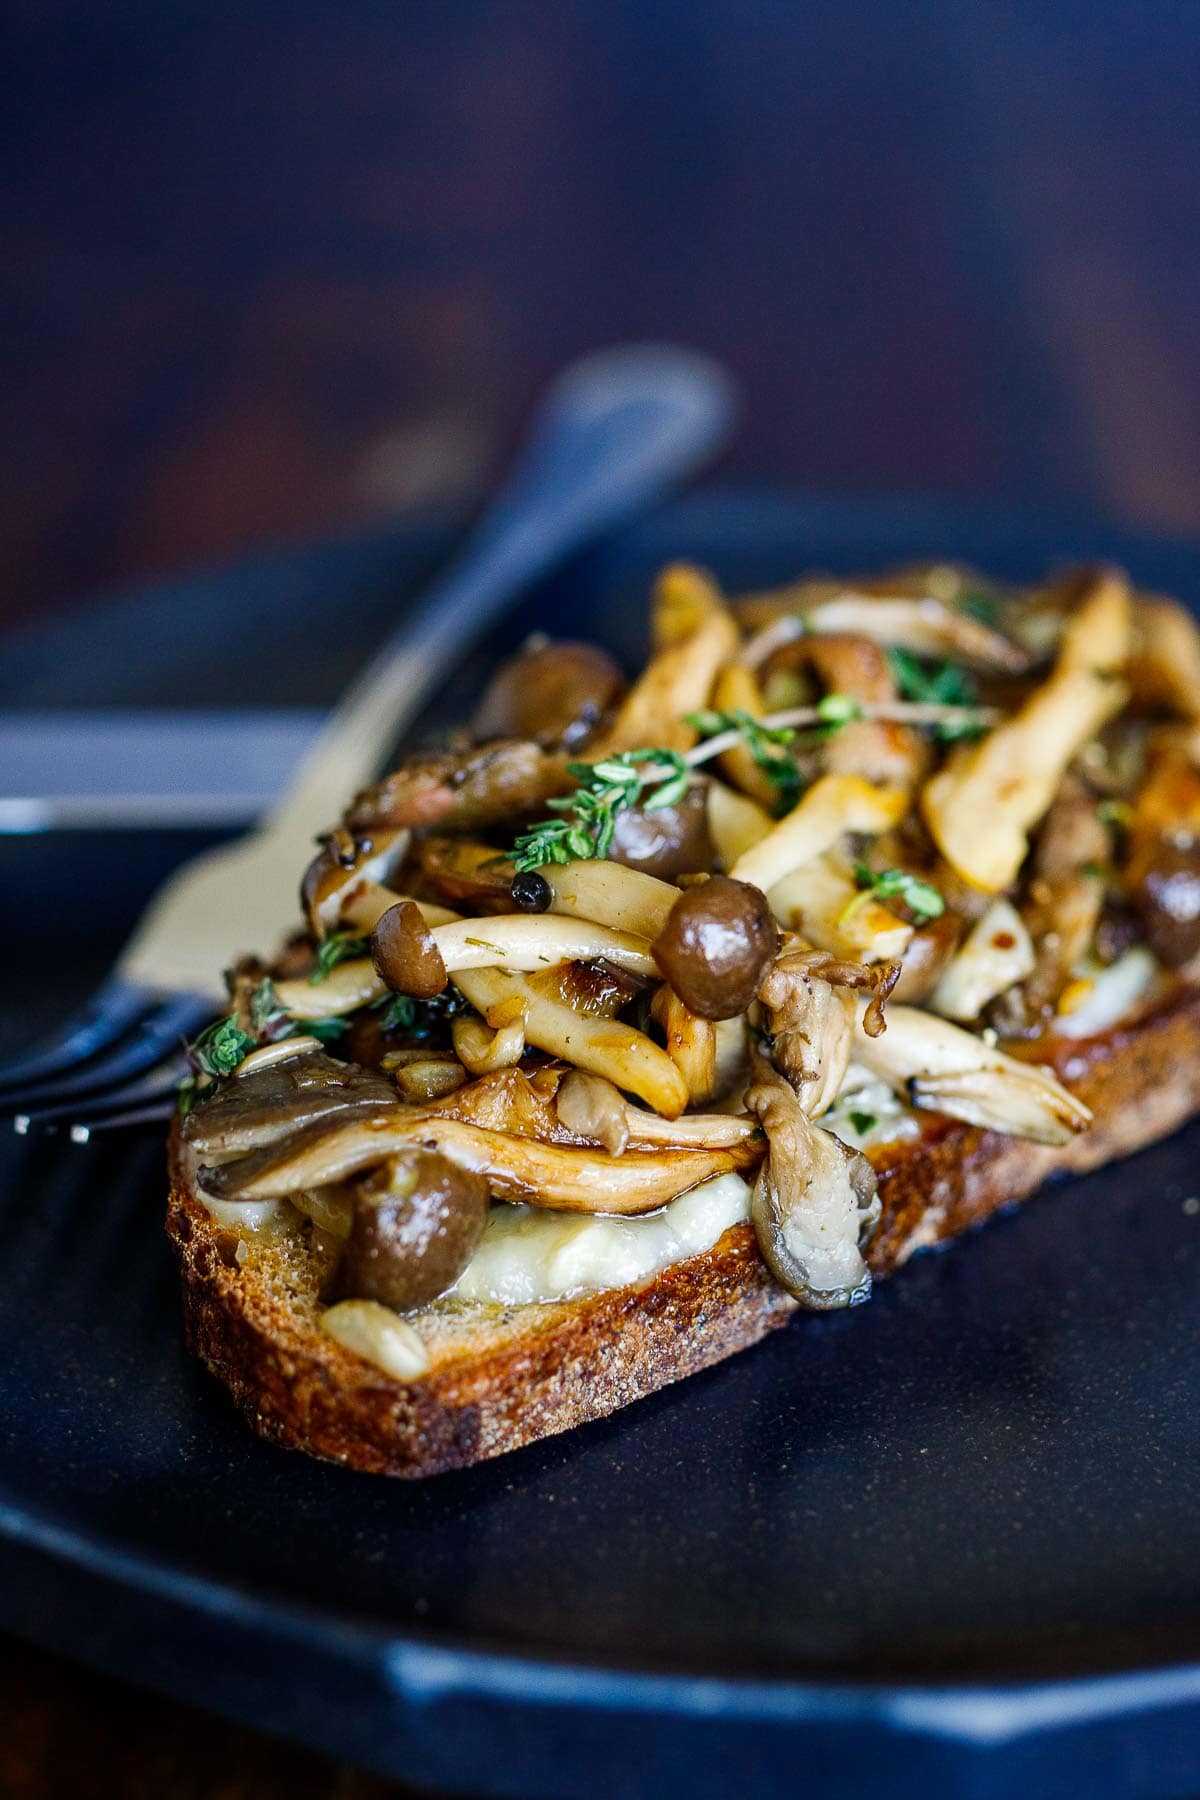 mixed mushroom toast with melted cheese, garnished with fresh thyme.